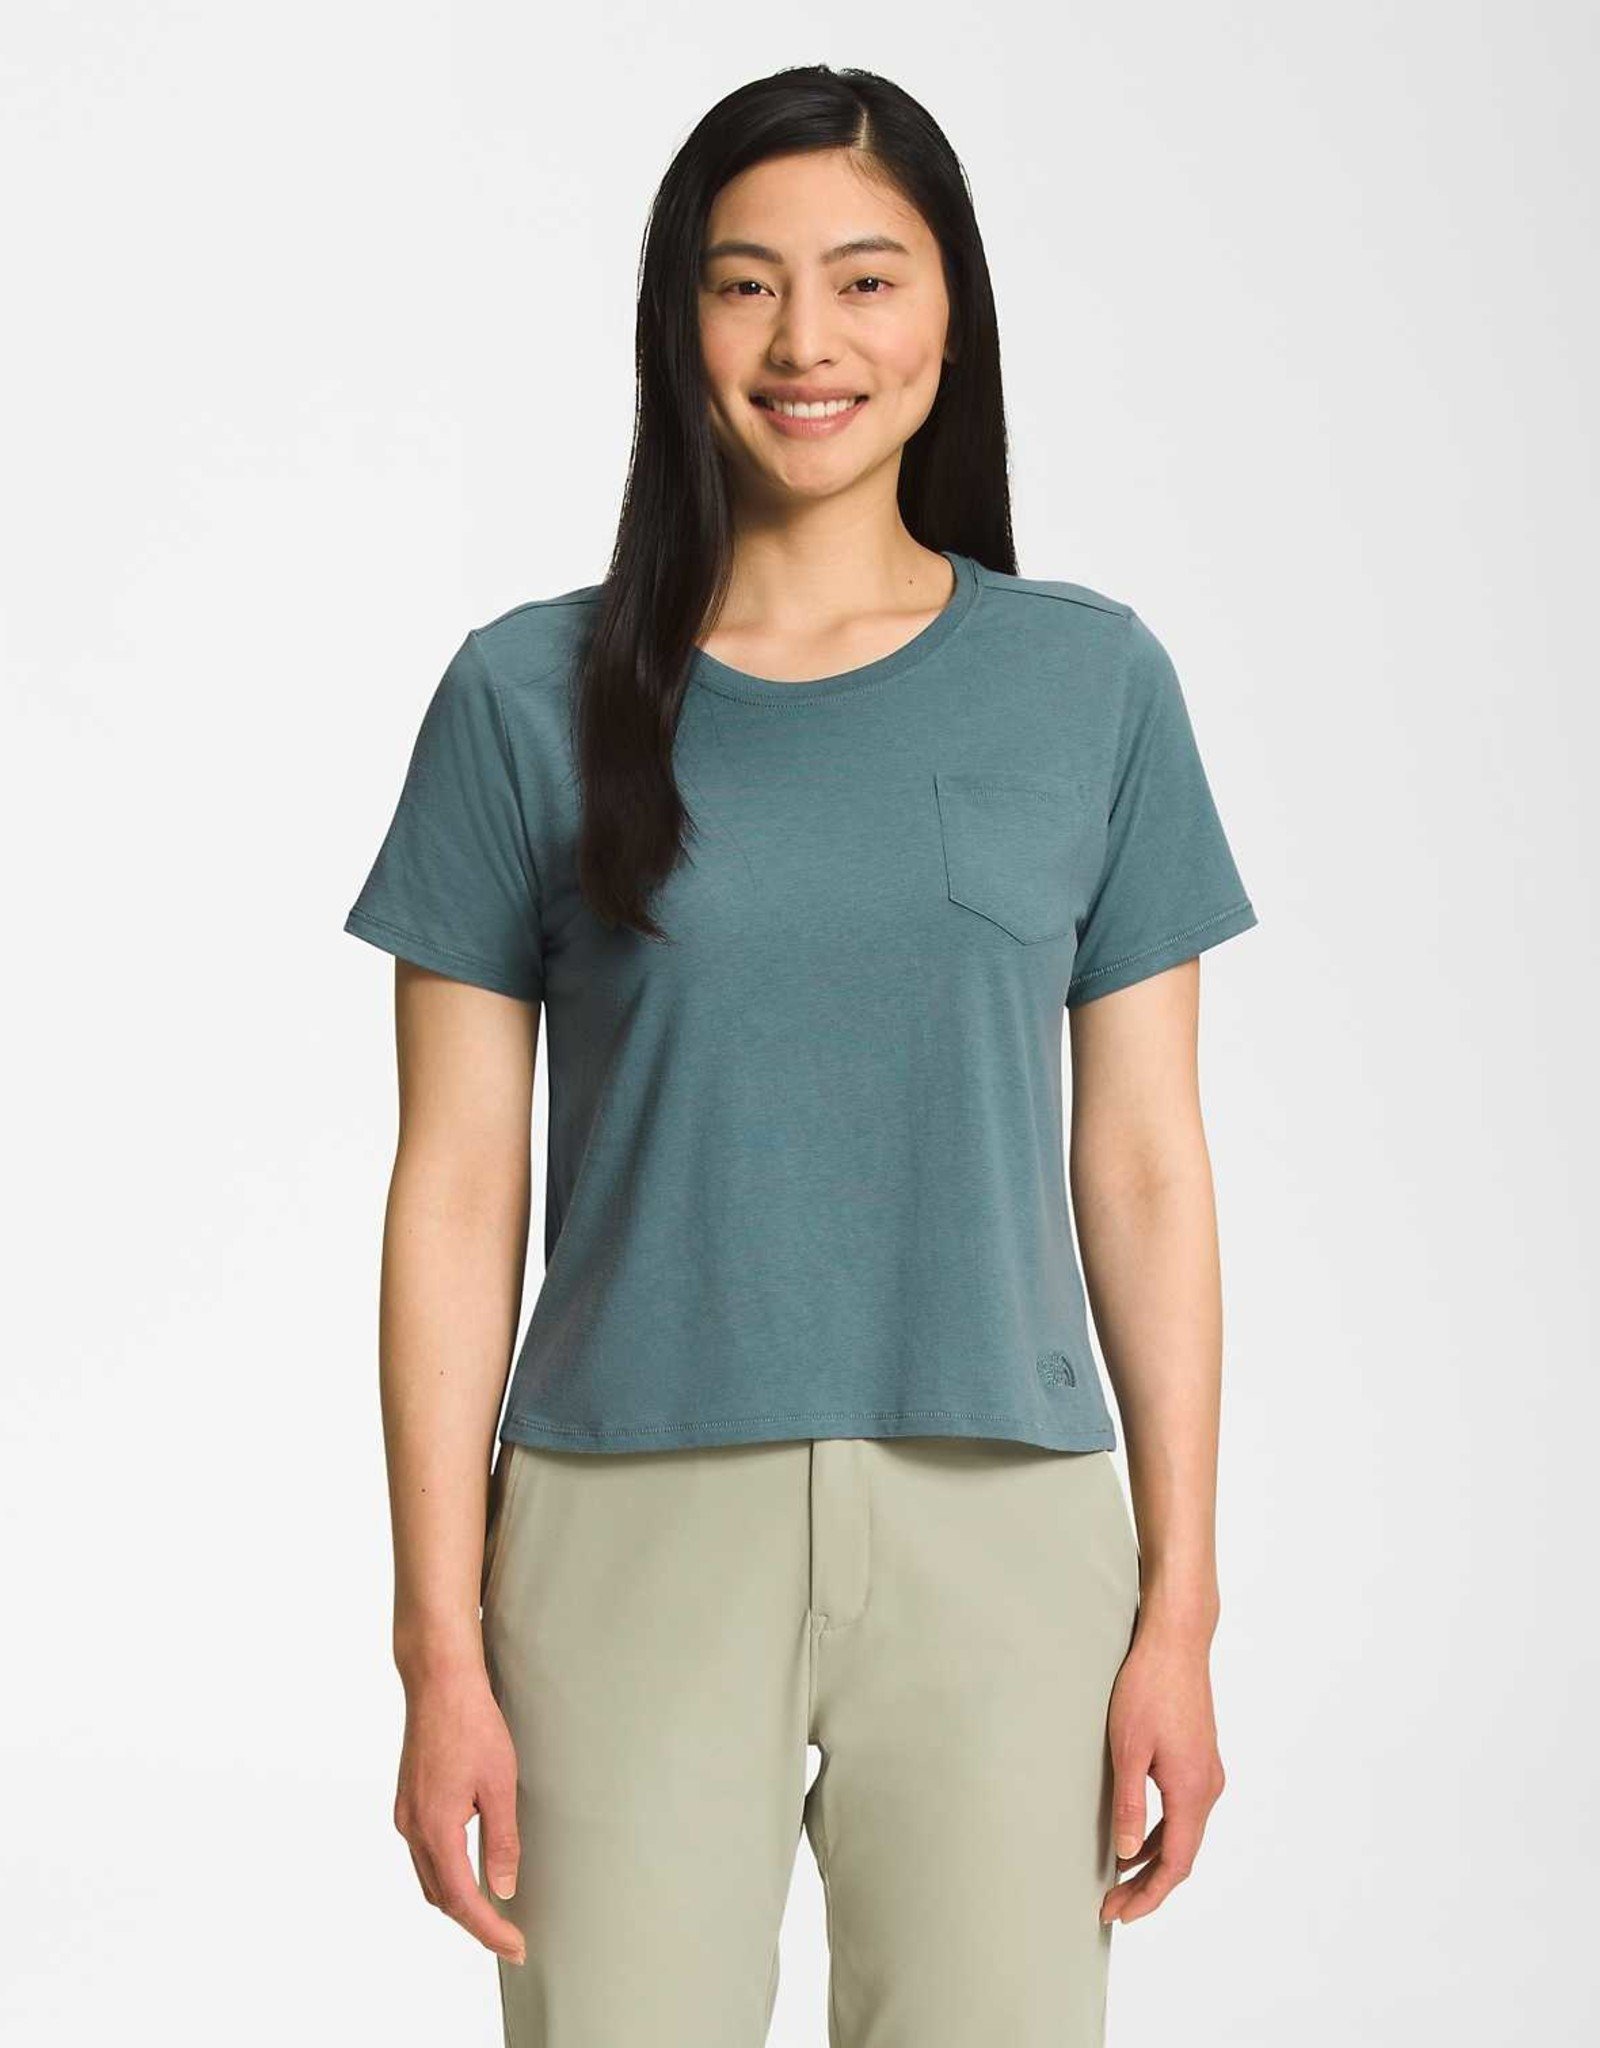 The North Face The North Face Women's Terrain S/S Pocket Tee -S2022